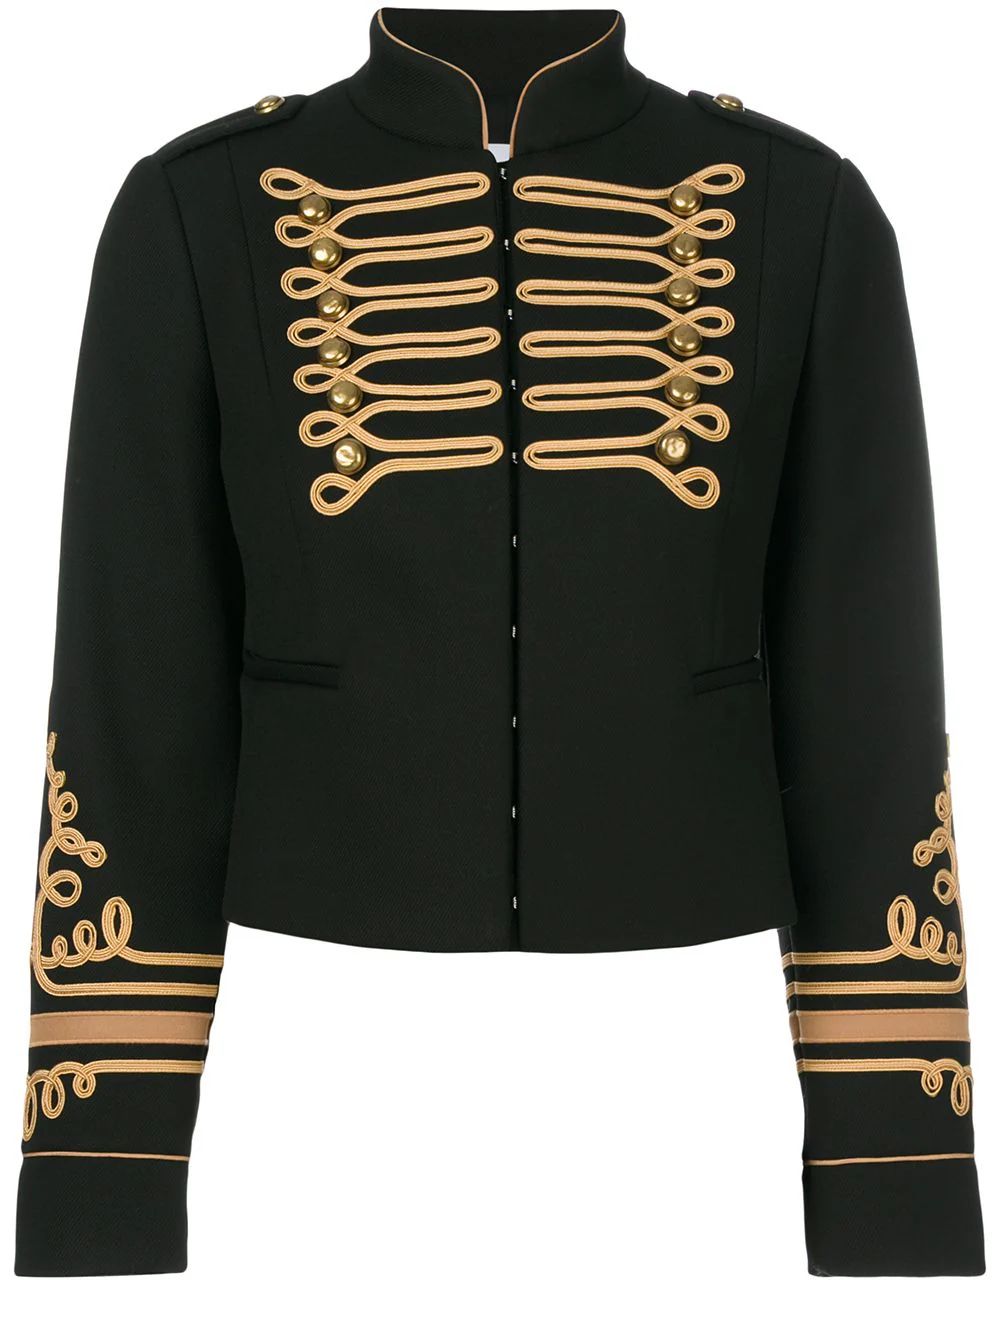 Red Valentino cropped band jacket - Black | FarFetch US